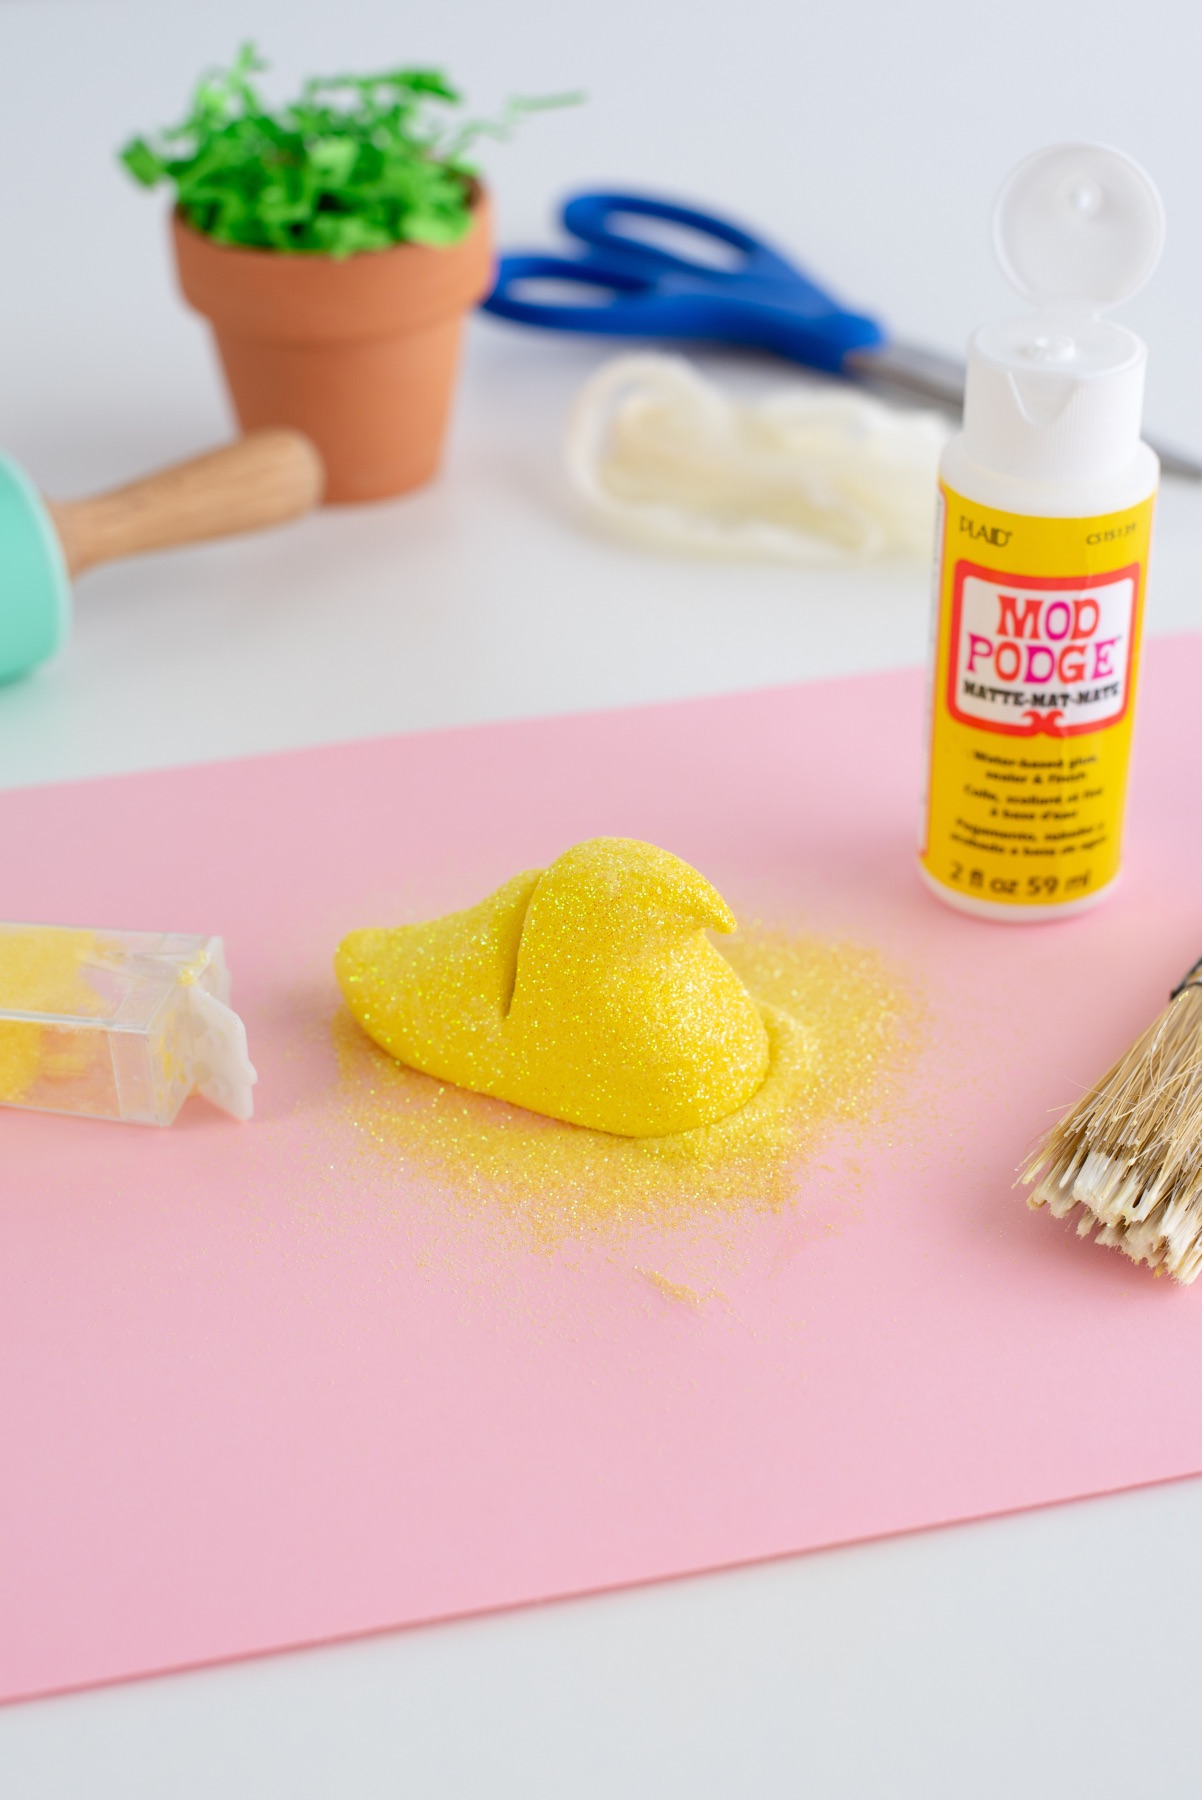 coat the clay peep in mod podge and glitter